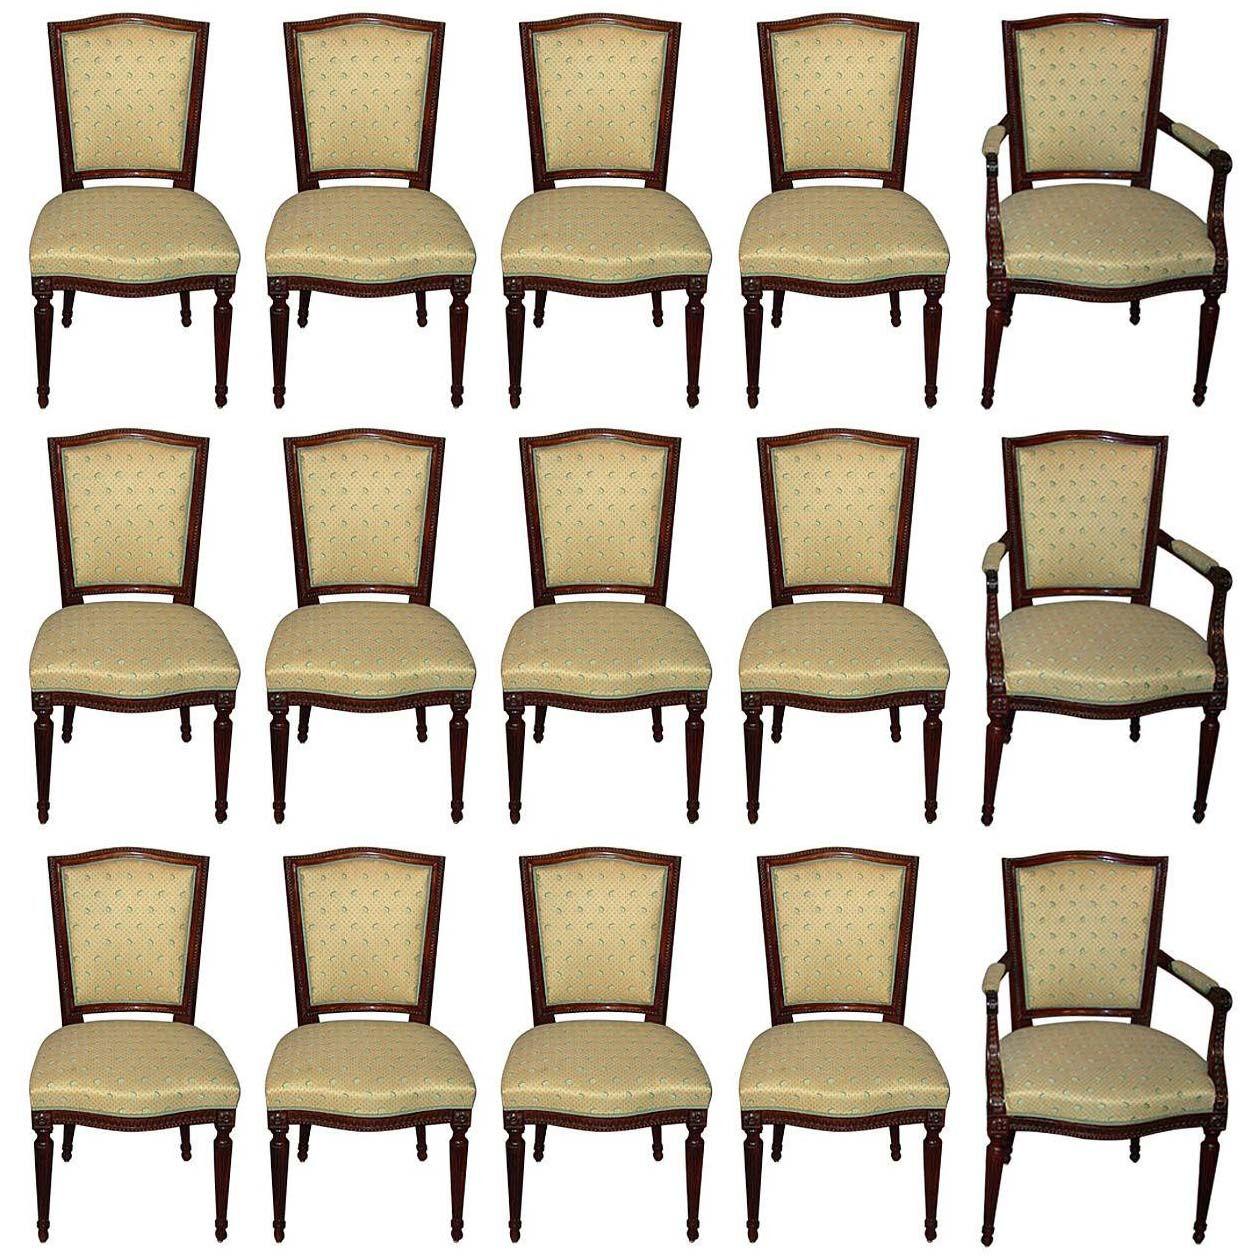 A Dutch suite of 12 chairs and 3 armchairs